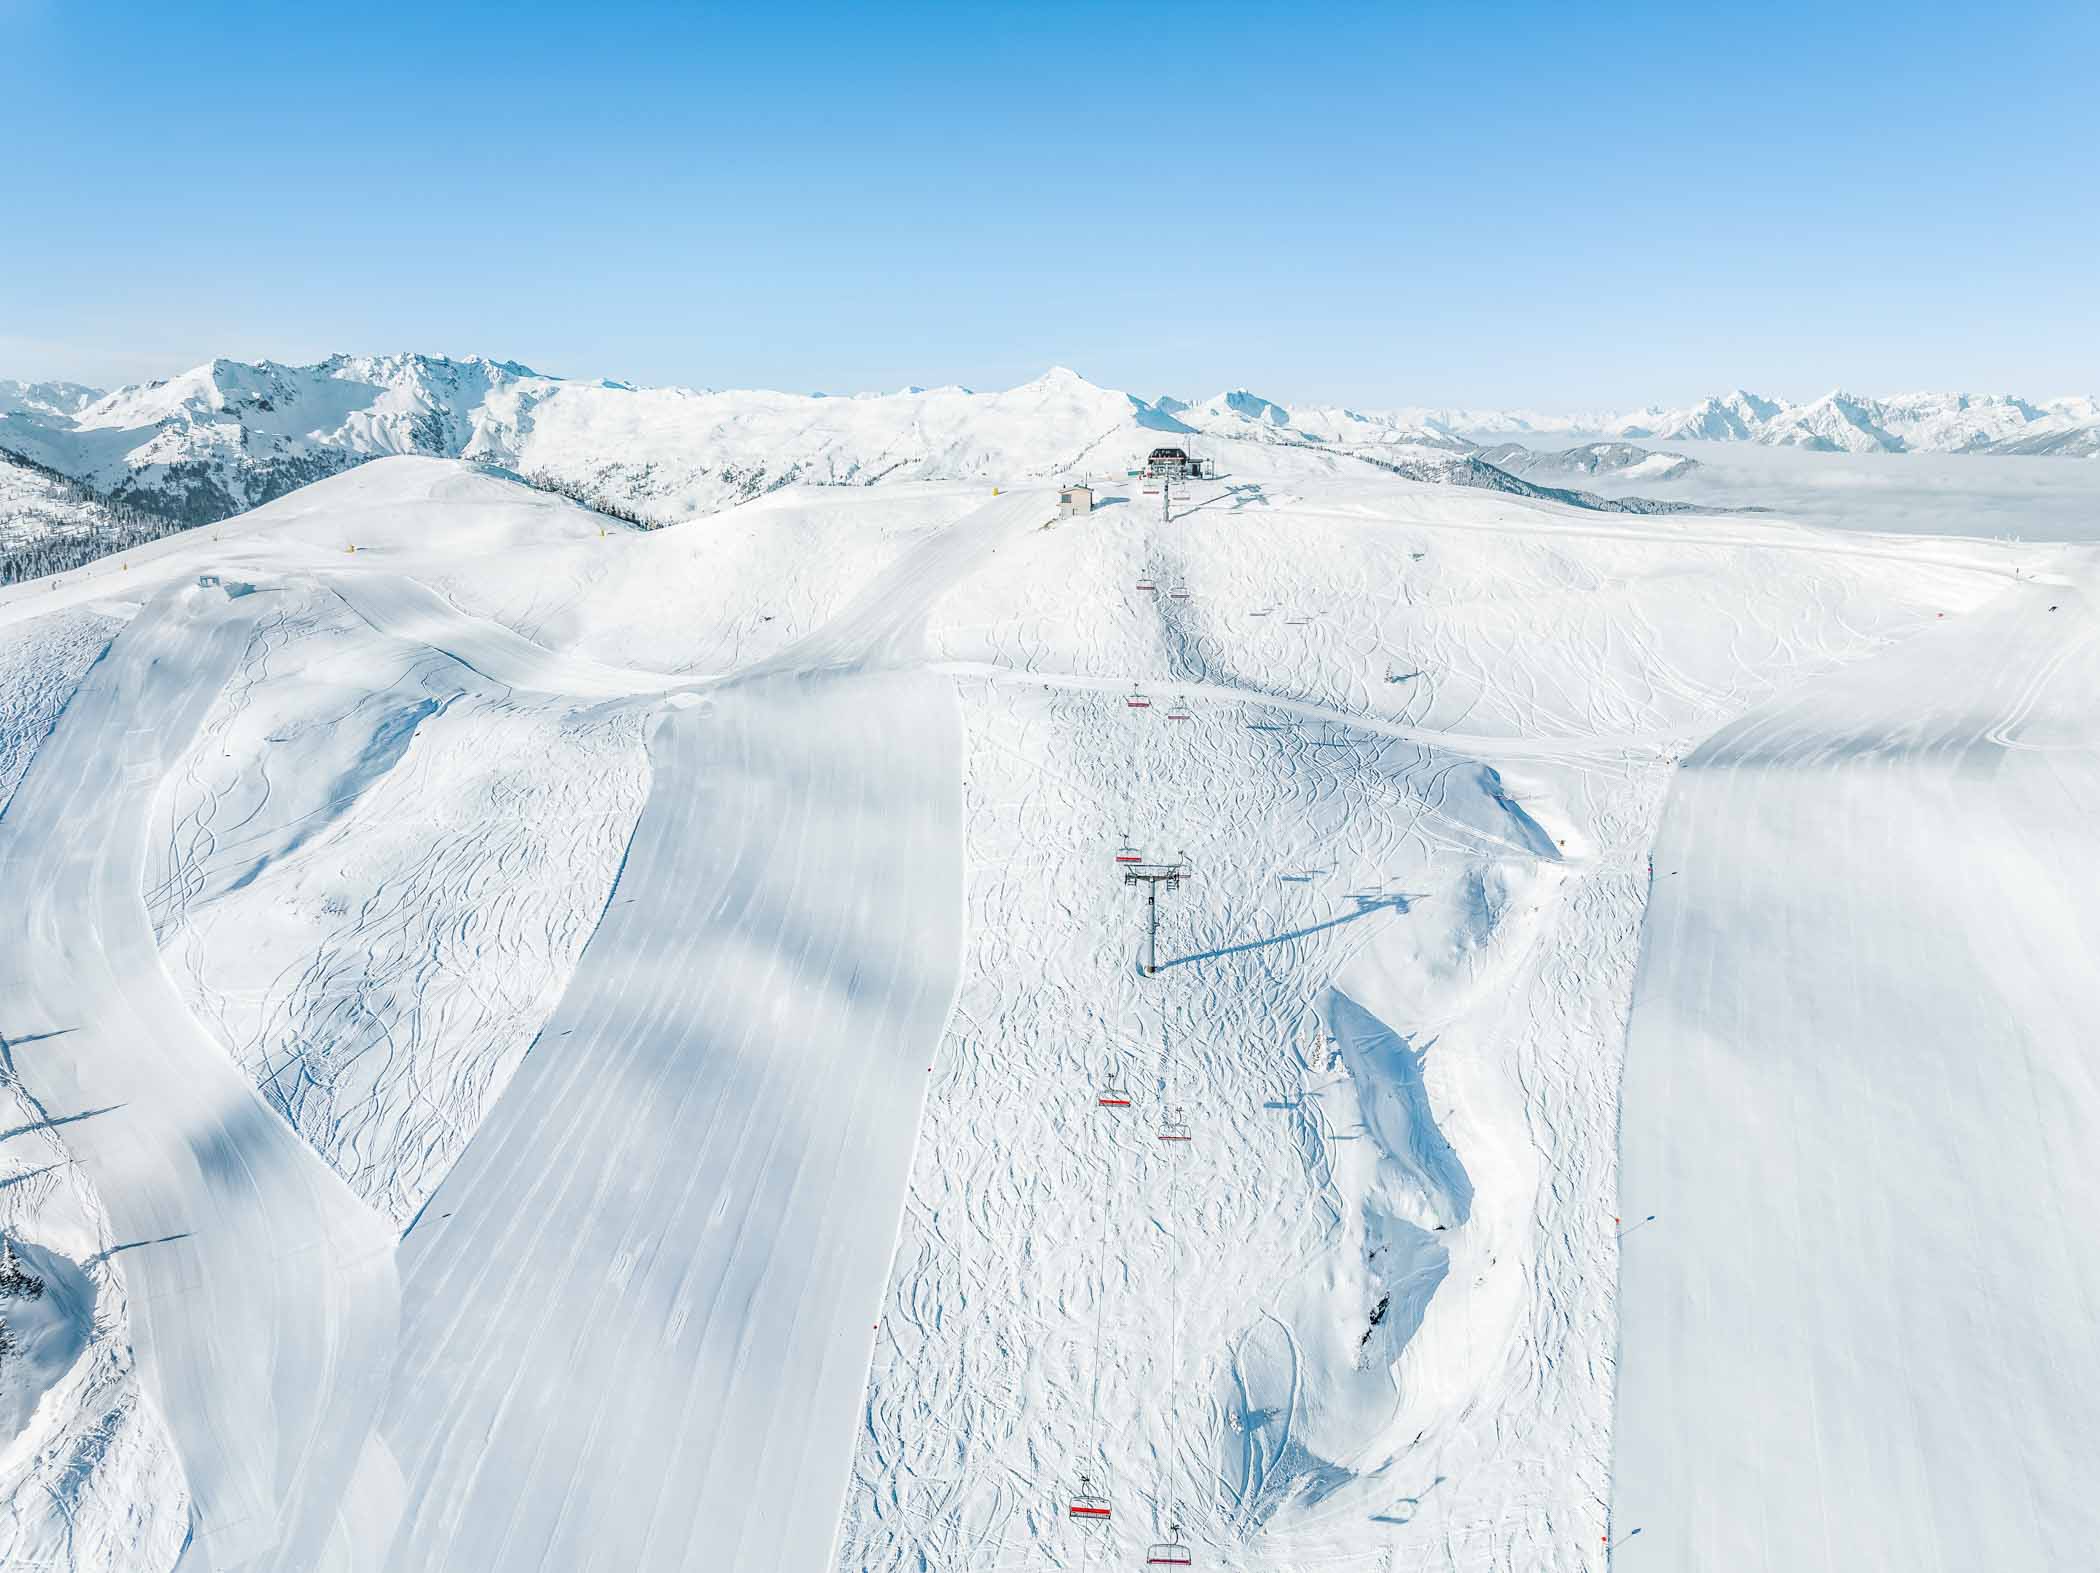 Beautiful white pistes, high in the mountains, with peaks in the distance poking through the clouds, a lift line running down the middle of the image (shot from above by drone)